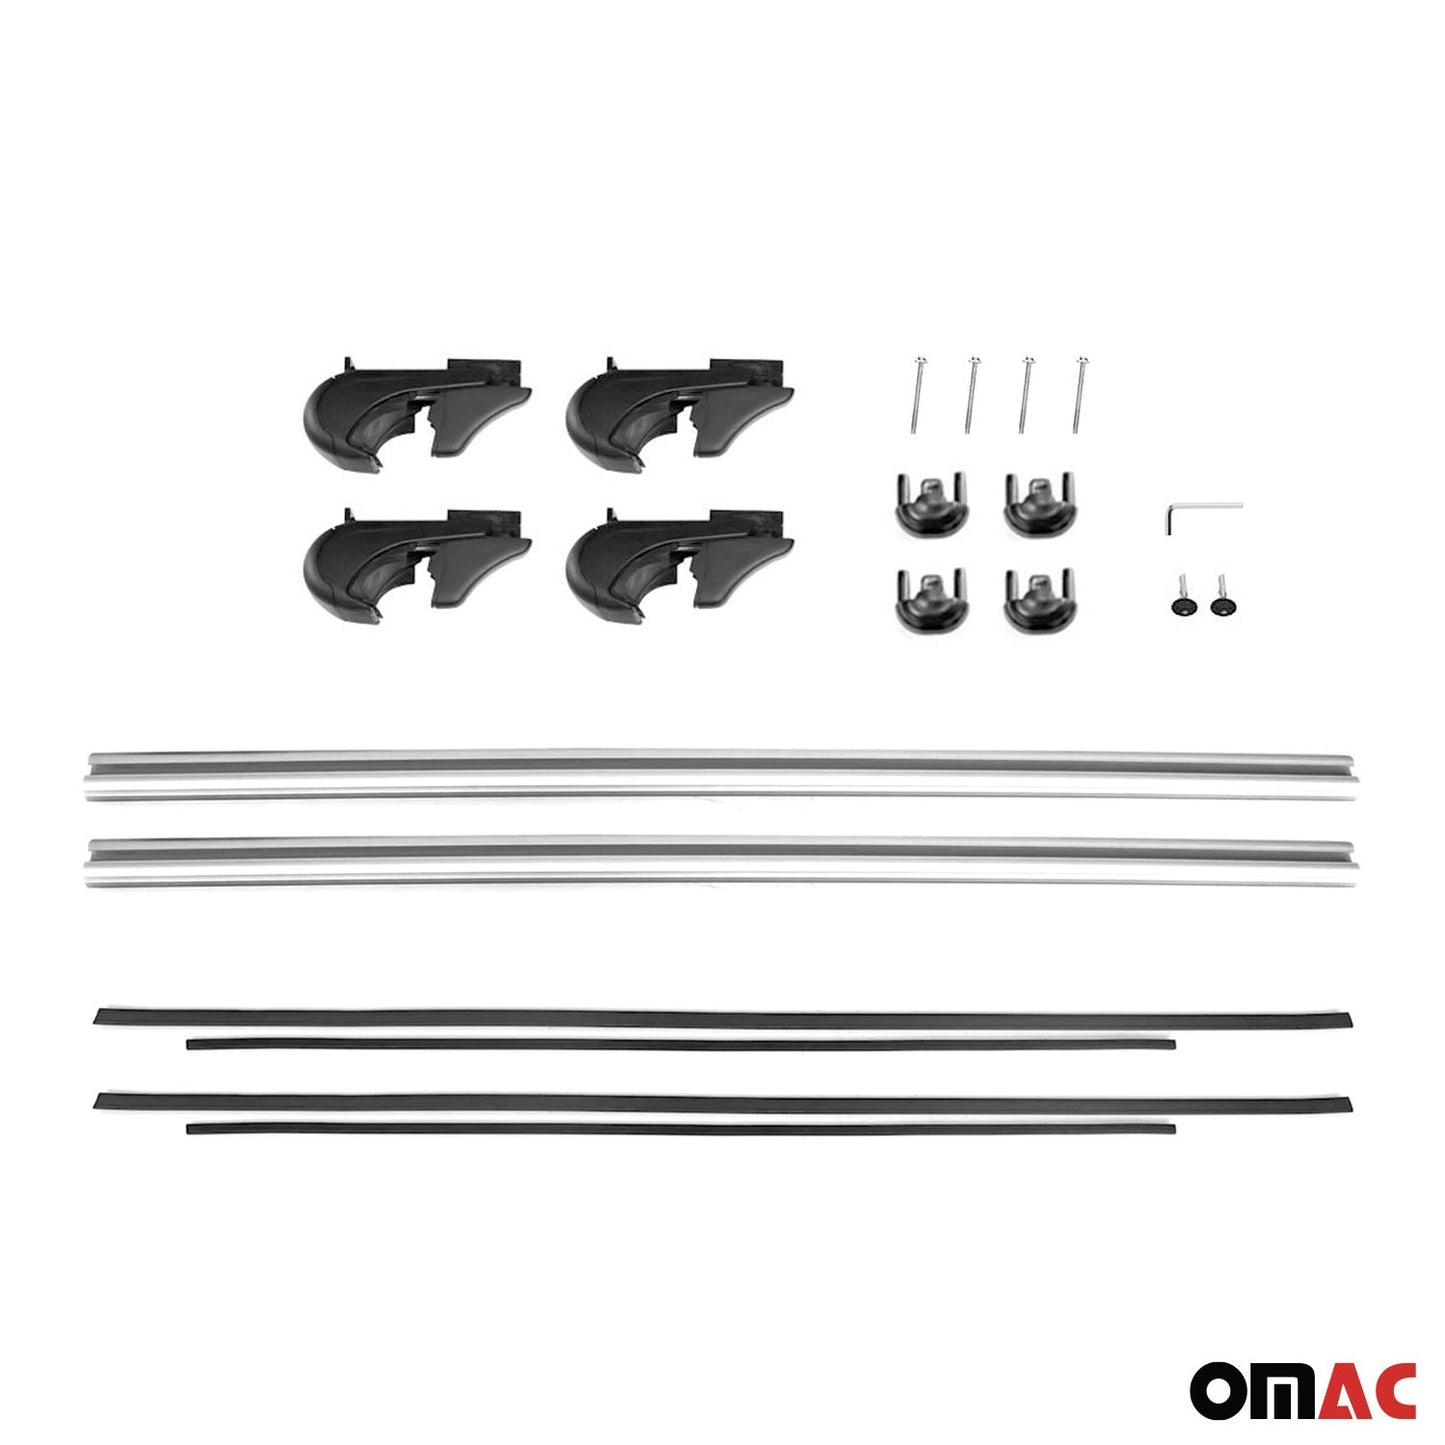 OMAC Lockable Roof Rack Cross Bars Luggage Carrier for Ford Explorer 2011-2015 Gray 26989696929XL